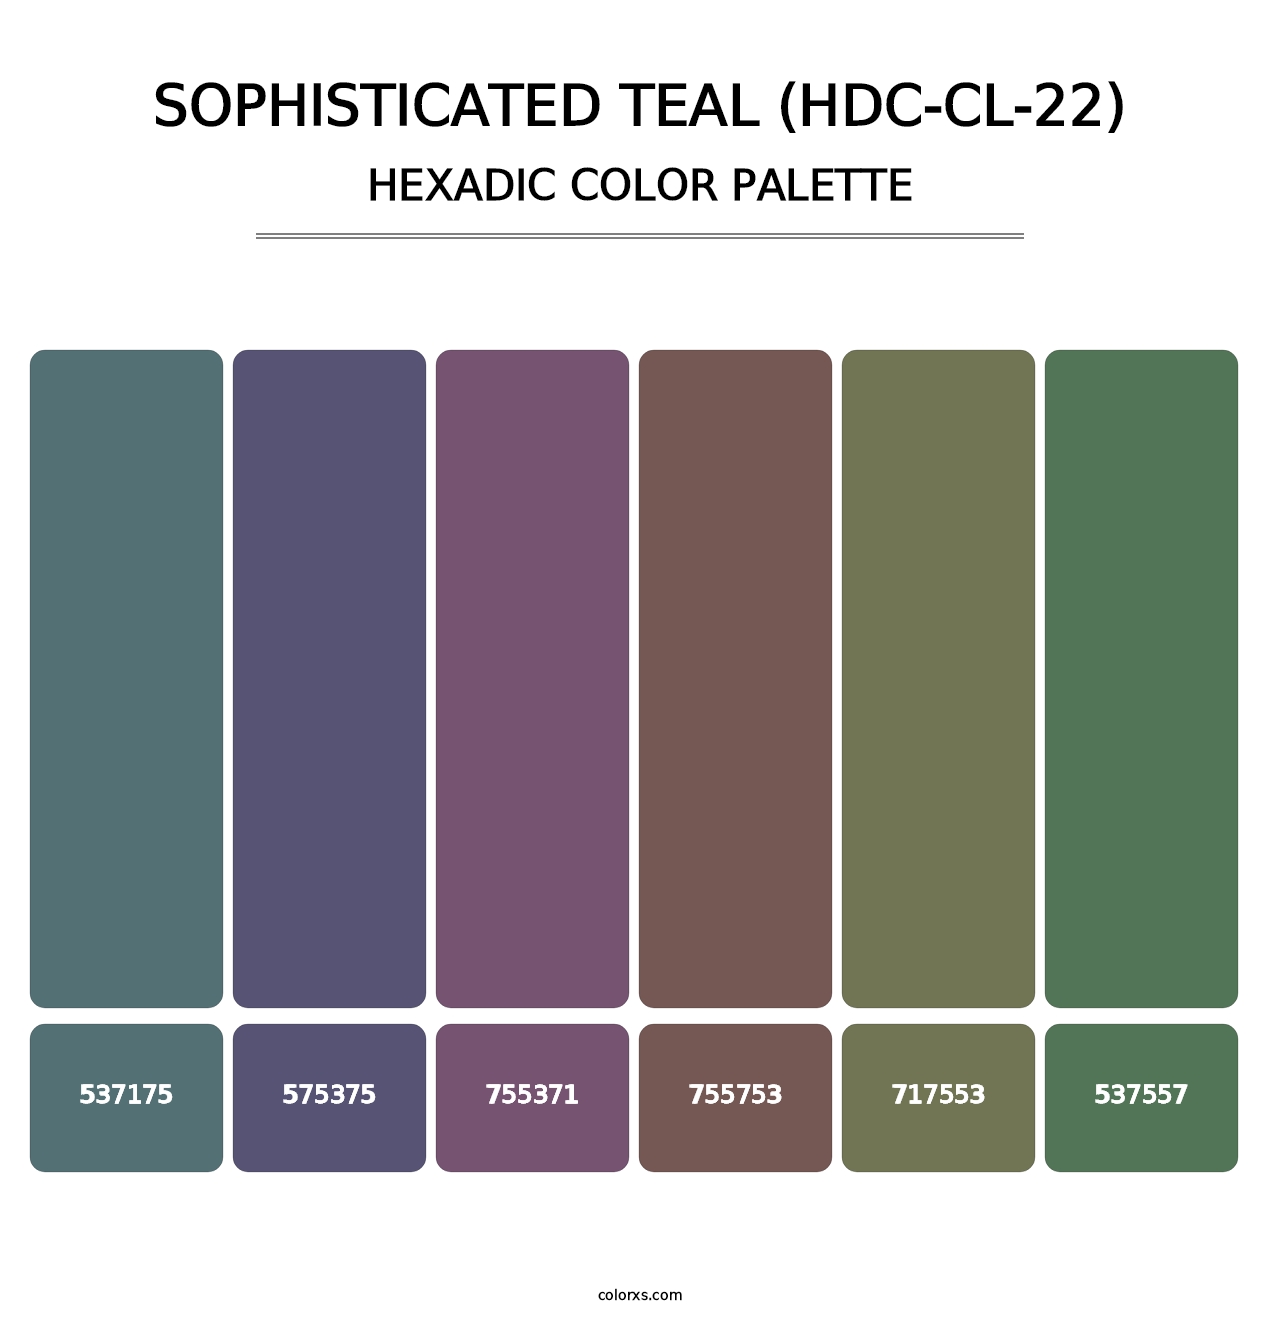 Sophisticated Teal (HDC-CL-22) - Hexadic Color Palette